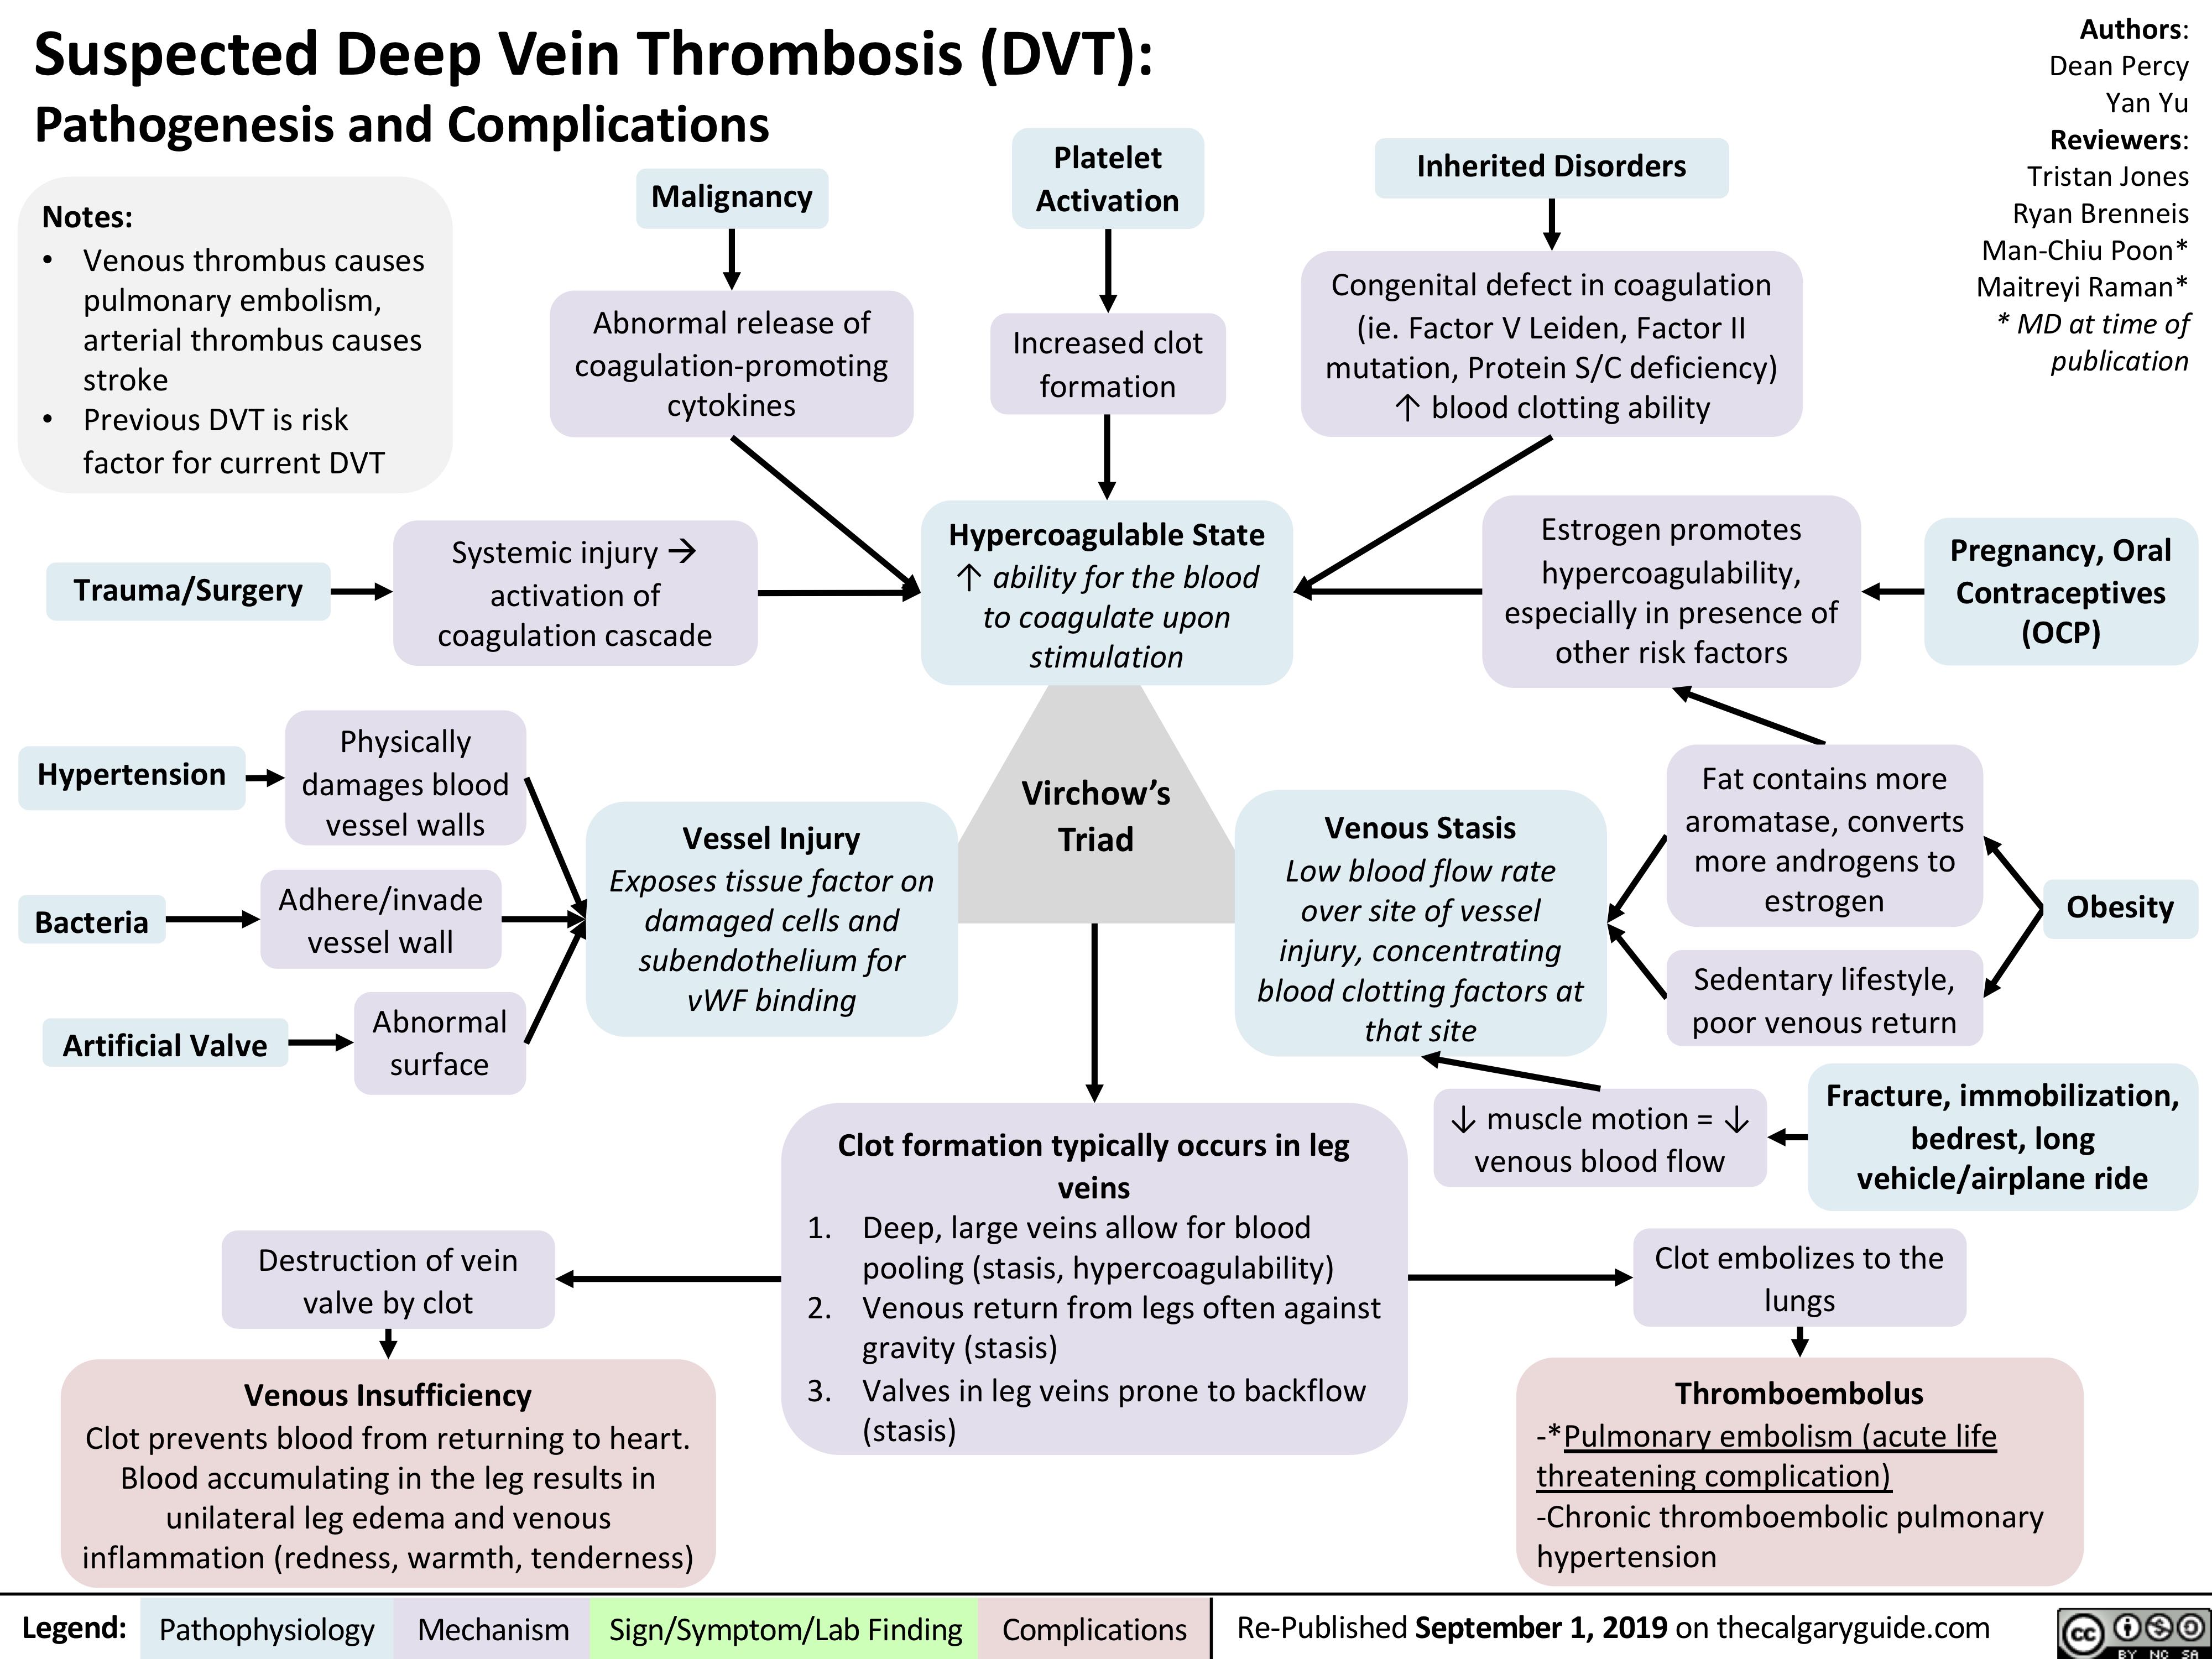 Suspected Deep Vein Thrombosis (DVT):
Authors: Dean Percy Yan Yu Reviewers: Tristan Jones Ryan Brenneis Man-Chiu Poon* Maitreyi Raman* * MD at time of publication
Pregnancy, Oral Contraceptives (OCP)
Pathogenesis and Complications
Platelet Activation
Increased clot formation
Hypercoagulable State
↑ ability for the blood to coagulate upon stimulation
Inherited Disorders
Congenital defect in coagulation (ie. Factor V Leiden, Factor II
mutation, Protein S/C deficiency) ↑ blood clotting ability
Estrogen promotes
hypercoagulability, especially in presence of other risk factors
    Notes:
• Venous thrombus causes pulmonary embolism, arterial thrombus causes stroke
• Previous DVT is risk factor for current DVT
Trauma/Surgery
Malignancy
Abnormal release of coagulation-promoting cytokines
Systemic injuryà activation of coagulation cascade
                       Hypertension
Bacteria Artificial Valve
Physically damages blood vessel walls
Adhere/invade vessel wall
Abnormal surface
Vessel Injury
Exposes tissue factor on damaged cells and subendothelium for vWF binding
Virchow’s Triad
Venous Stasis
Low blood flow rate over site of vessel injury, concentrating blood clotting factors at that site
Fat contains more aromatase, converts more androgens to estrogen
Sedentary lifestyle, poor venous return
        Obesity
               Clot formation typically occurs in leg veins
Deep, large veins allow for blood pooling (stasis, hypercoagulability) Venous return from legs often against gravity (stasis)
Valves in leg veins prone to backflow (stasis)
↓ muscle motion = ↓ venous blood flow
Fracture, immobilization, bedrest, long vehicle/airplane ride
   Destruction of vein valve by clot
Venous Insufficiency
Clot prevents blood from returning to heart. Blood accumulating in the leg results in unilateral leg edema and venous inflammation (redness, warmth, tenderness)
1. 2. 3.
Clot embolizes to the lungs
Thromboembolus
-*Pulmonary embolism (acute life threatening complication)
-Chronic thromboembolic pulmonary hypertension
         Legend:
 Pathophysiology
 Mechanism
Sign/Symptom/Lab Finding
  Complications
Re-Published September 1, 2019 on thecalgaryguide.com
   